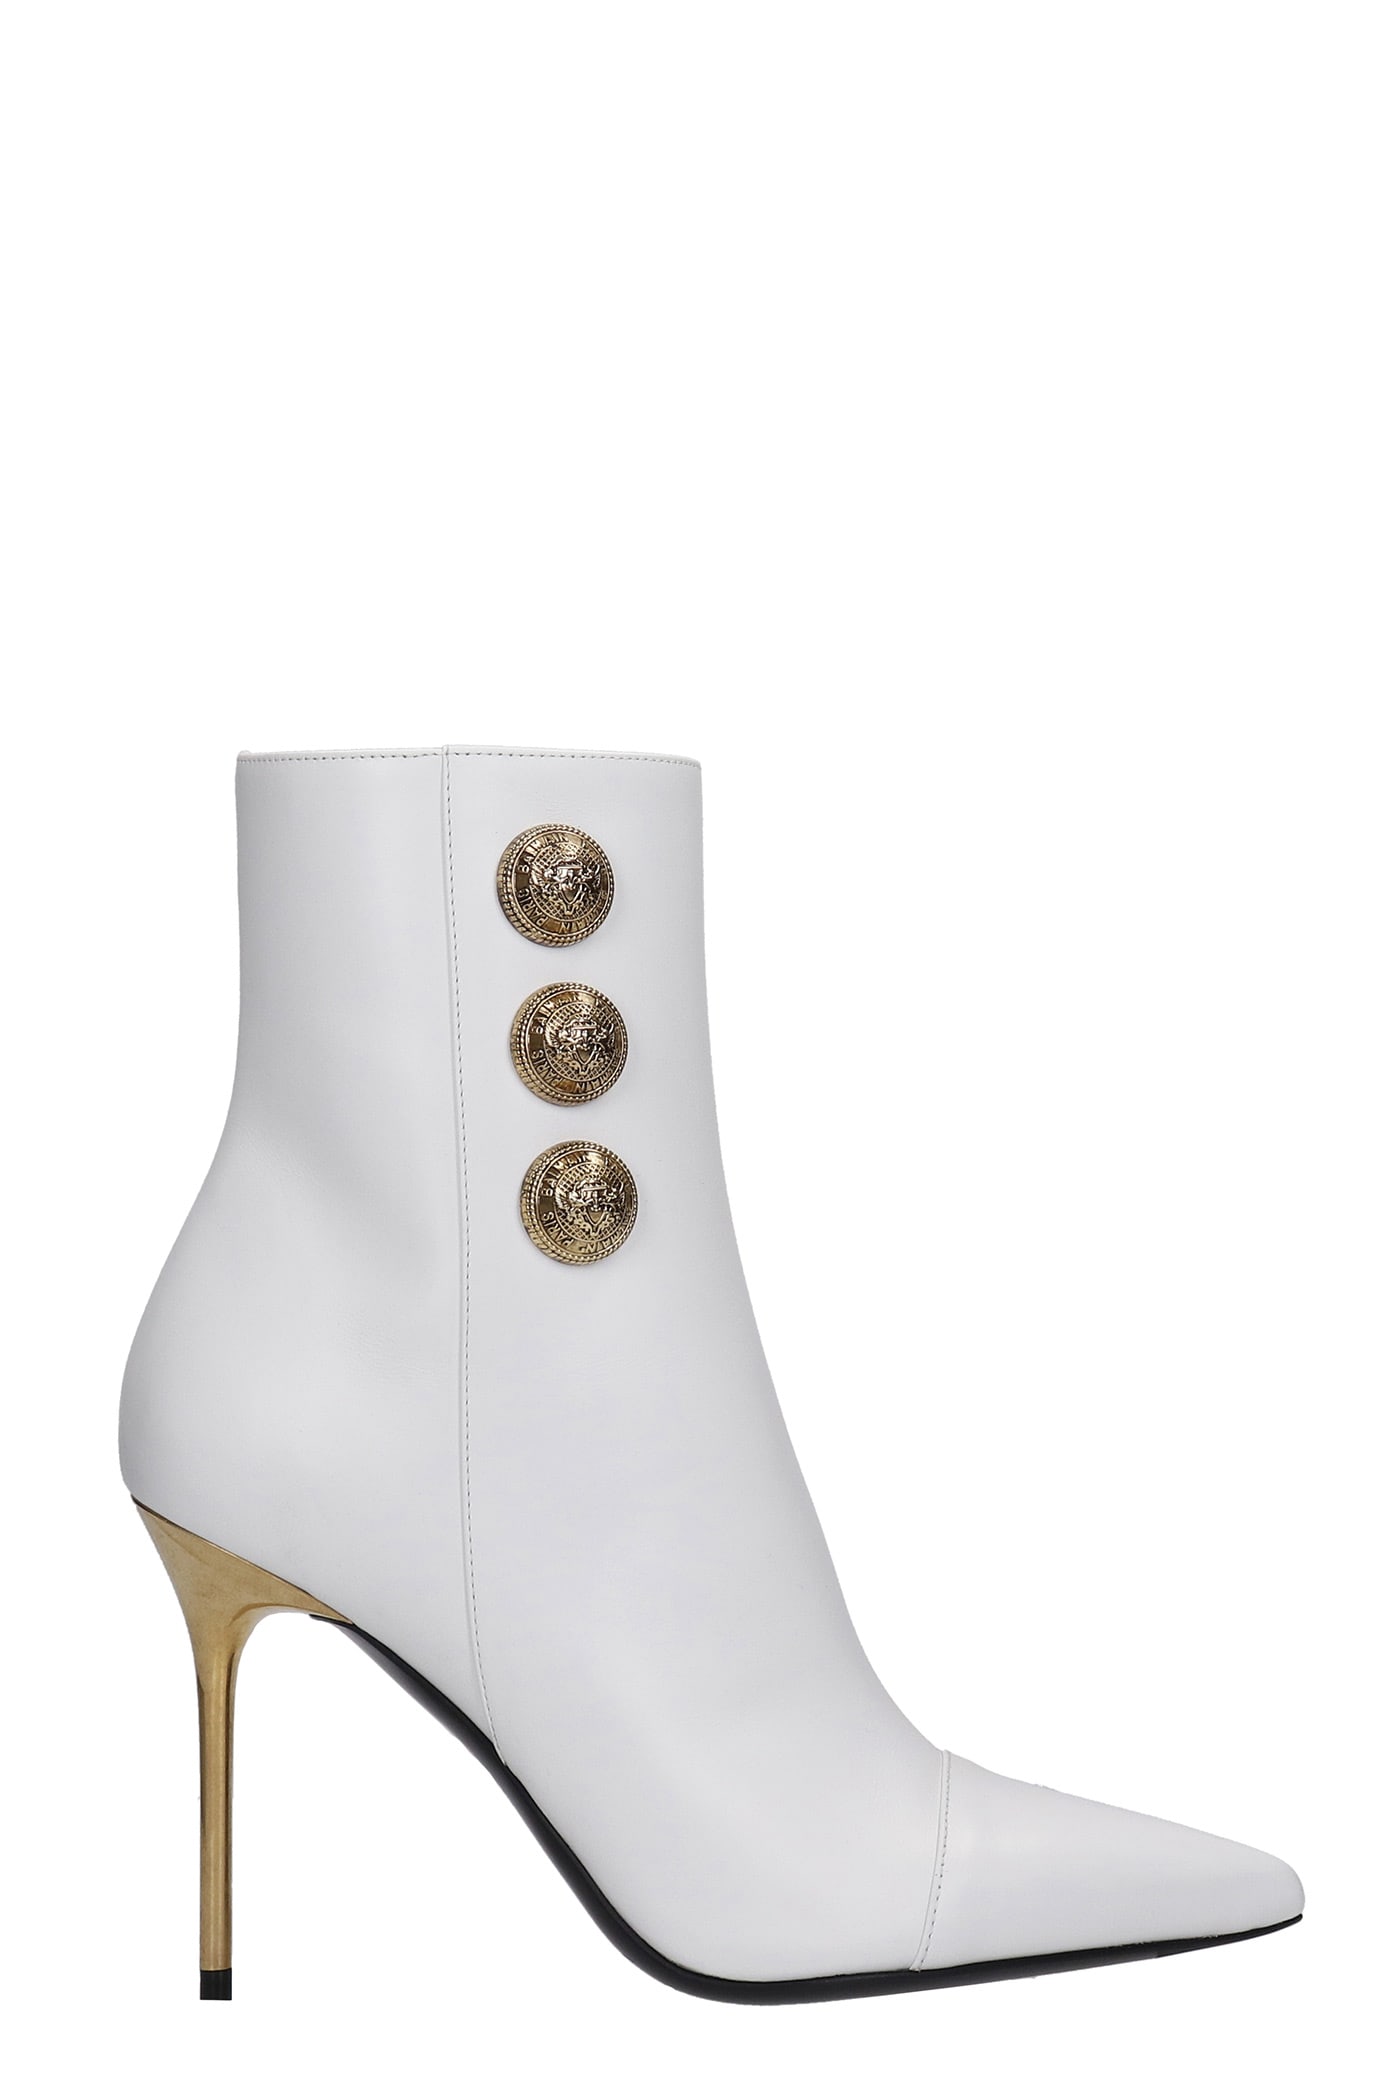 Balmain Roni High Heels Ankle Boots In White Leather